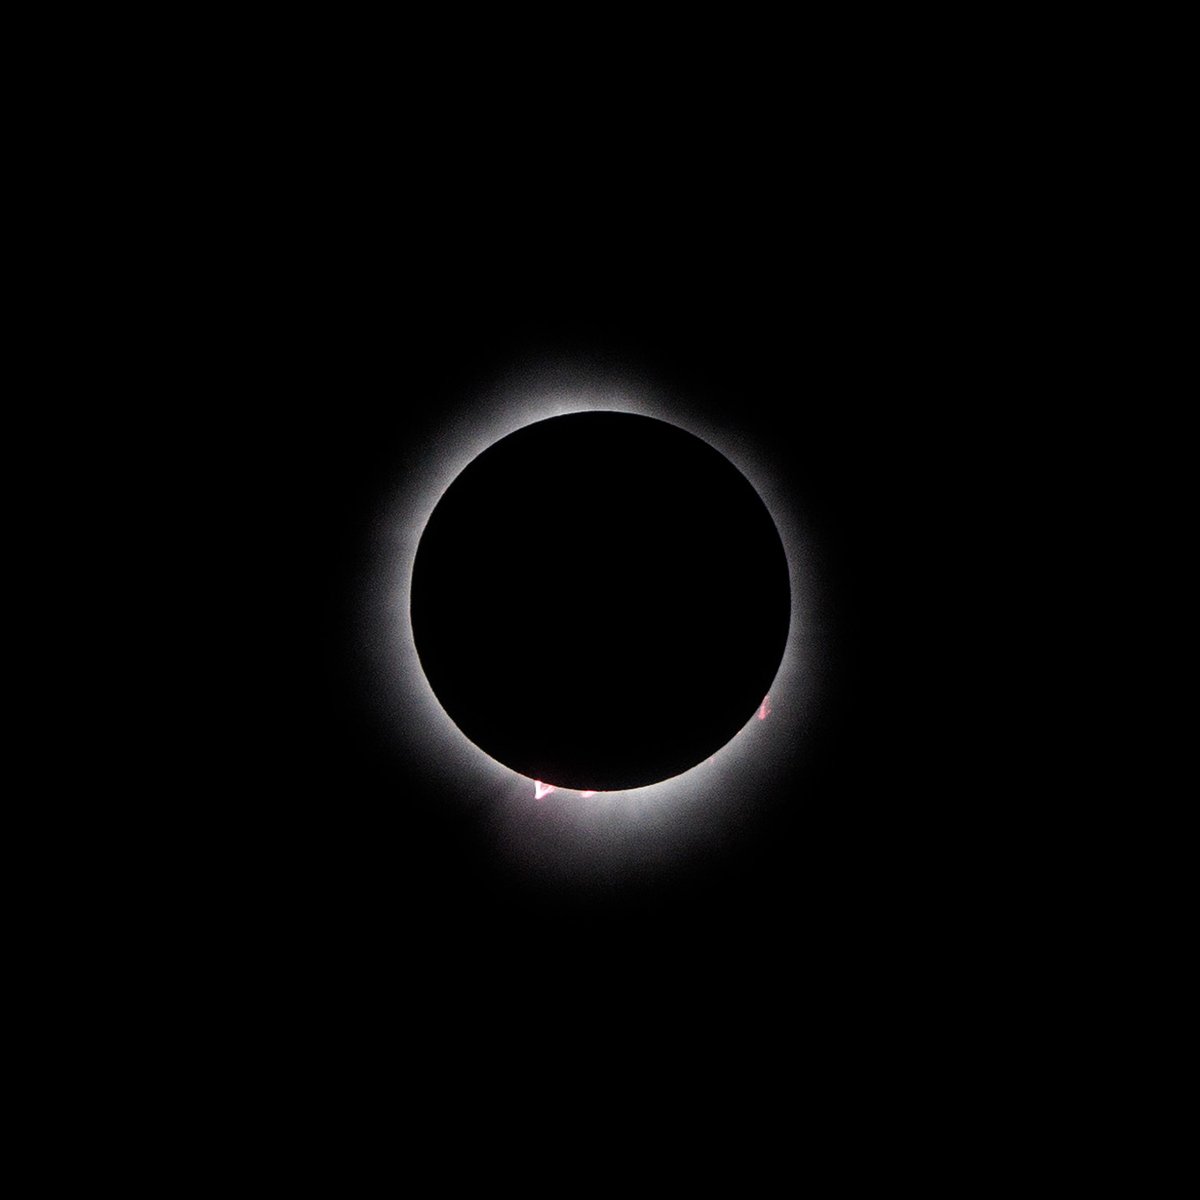 Yesterday's #Eclipse was a once in a life time opportunity for many here at UVM and we were so excited to be a part of it! #Vermont